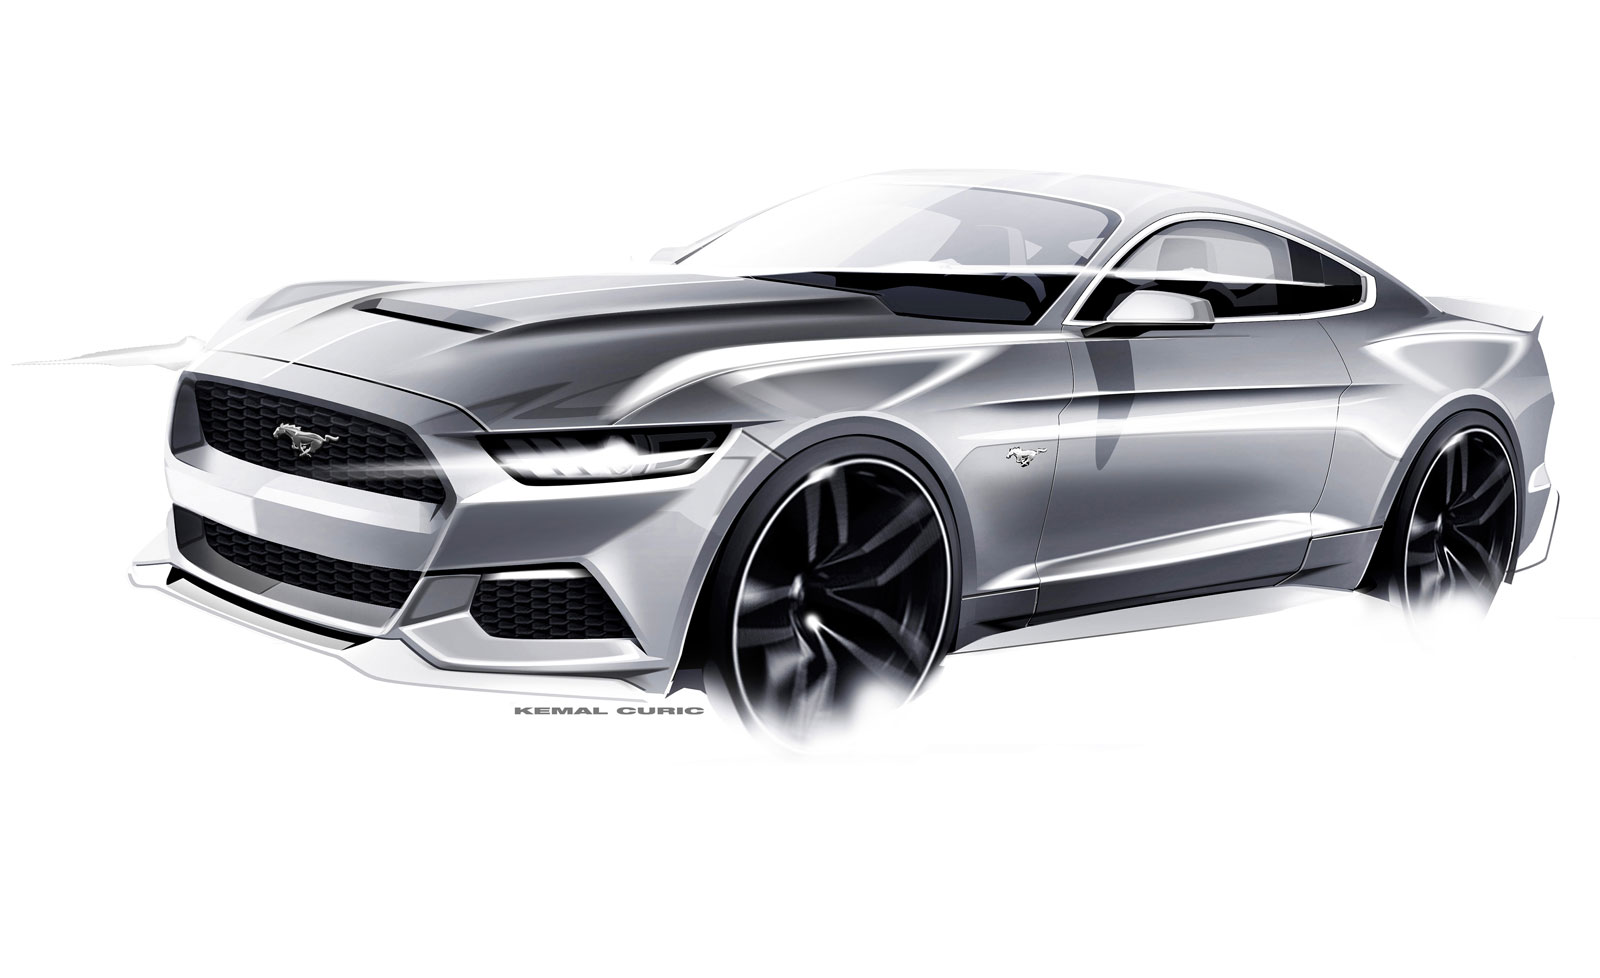 S650 Mustang First Look: S650 Mustang Prototype Spied With Production Body! 📸 01-Ford-Mustang-Design-Sketch-by-Kemal-Curic-08